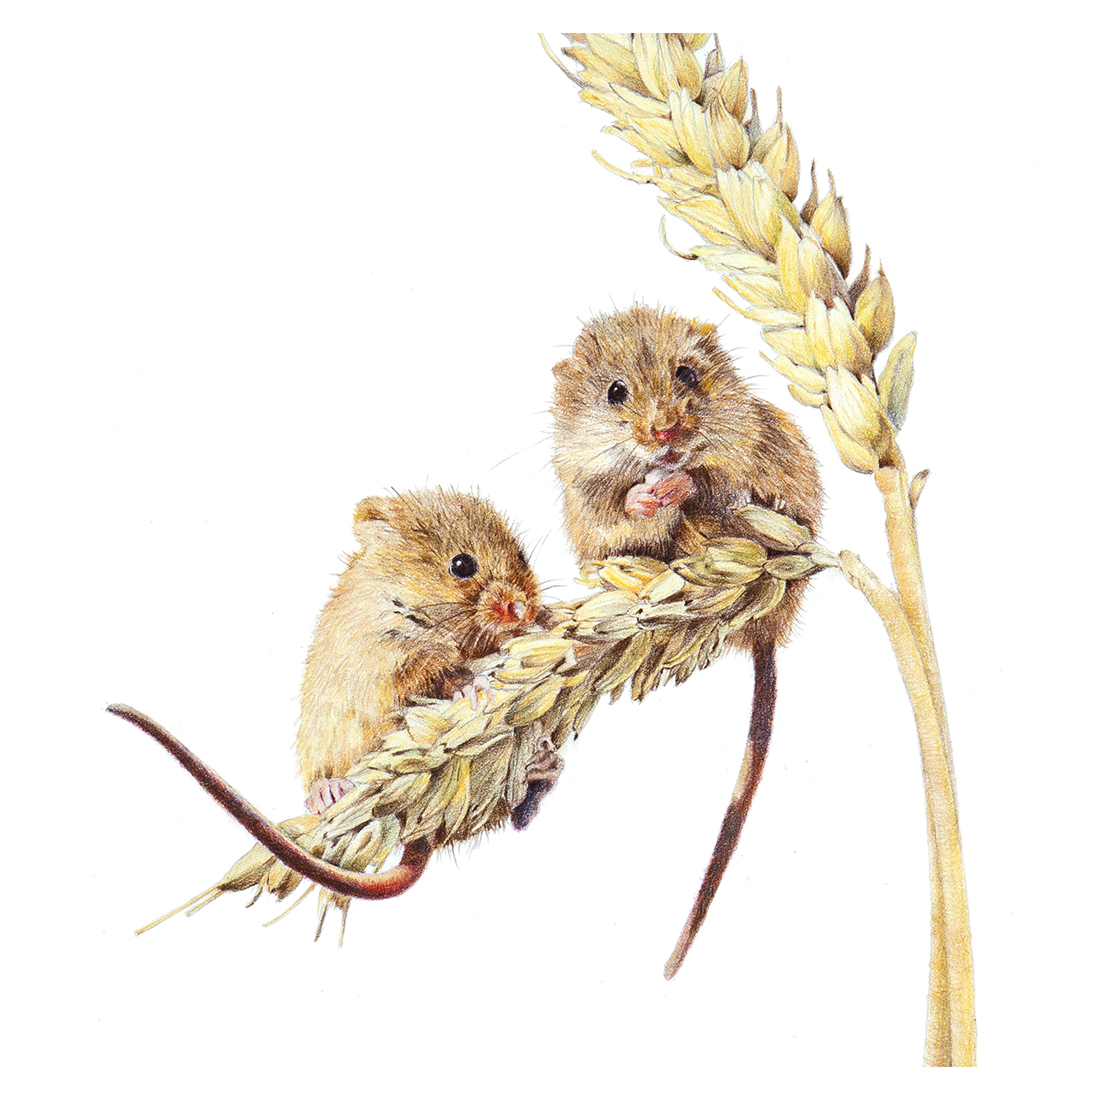 Two Harvest Mice | Jacqueline South Illustration and Design